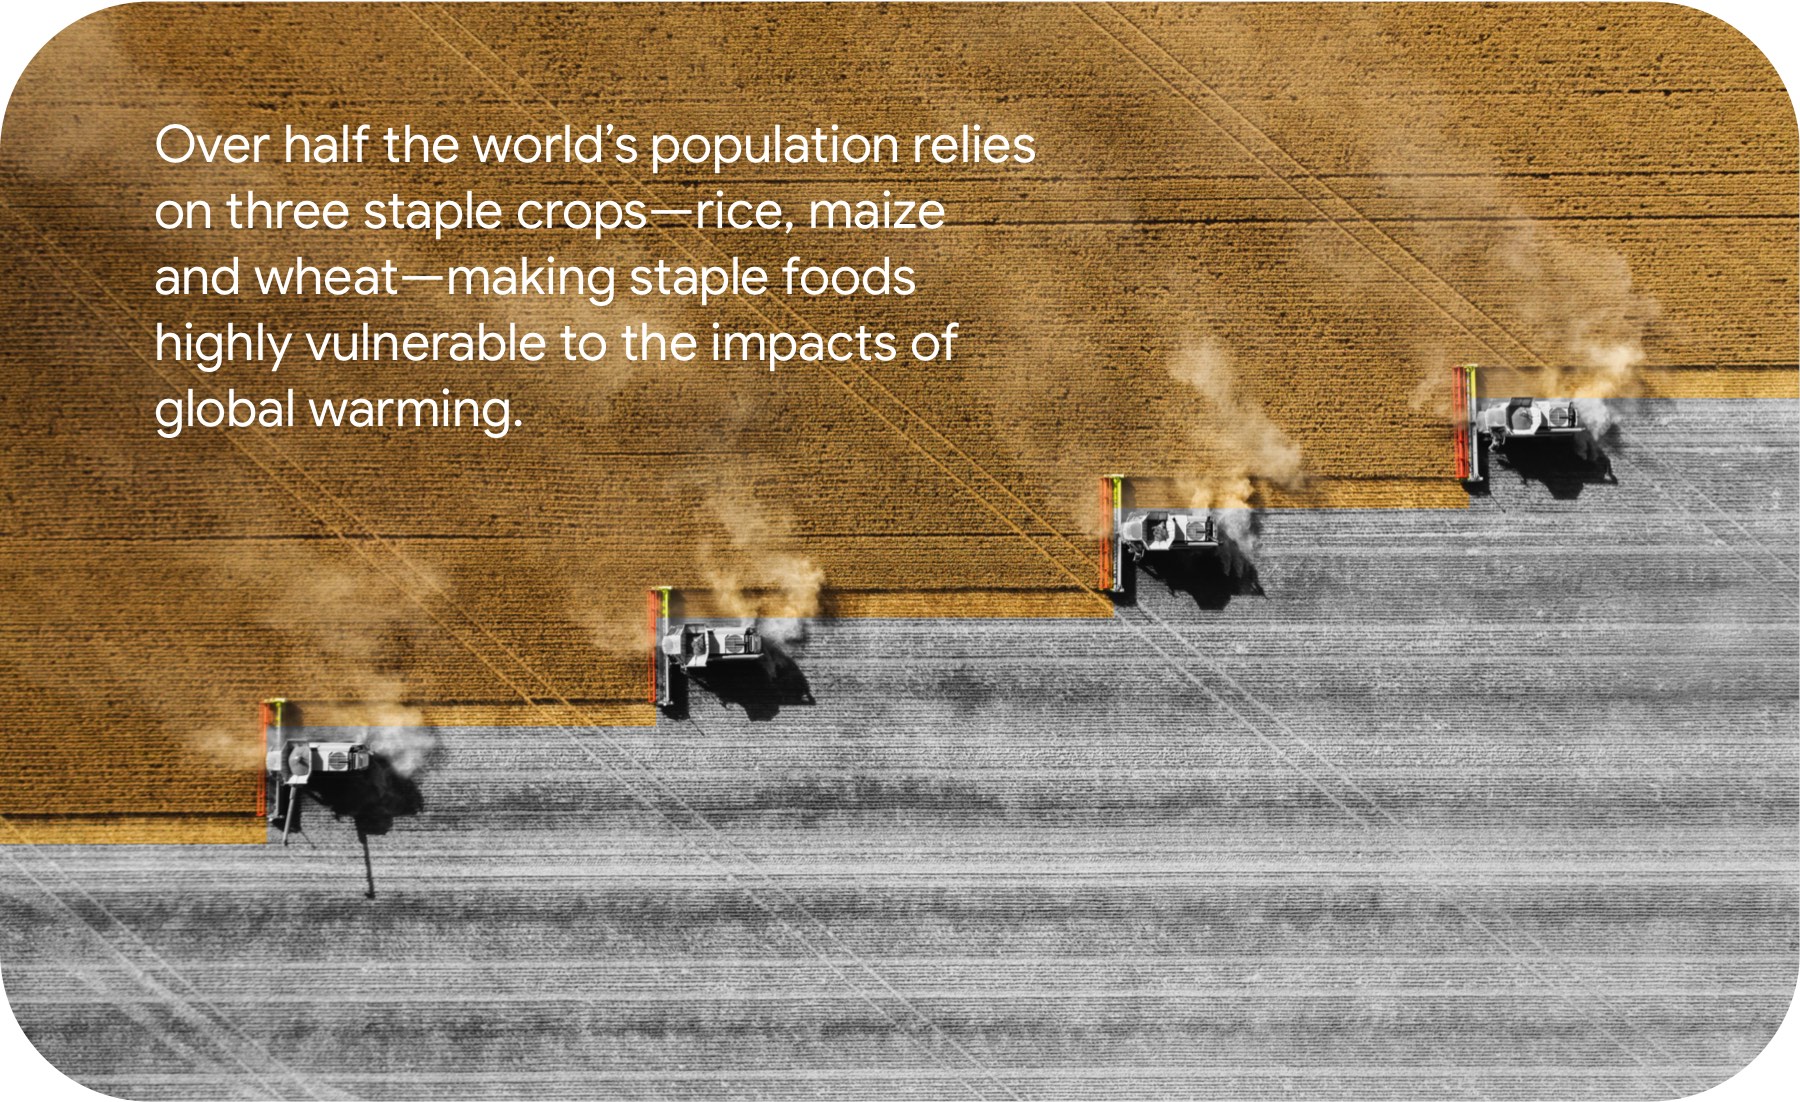 Over half the world’s population relies on three staple crops—rice, maize and wheat—making staple foods highly vulnerable to the impacts of global warming.